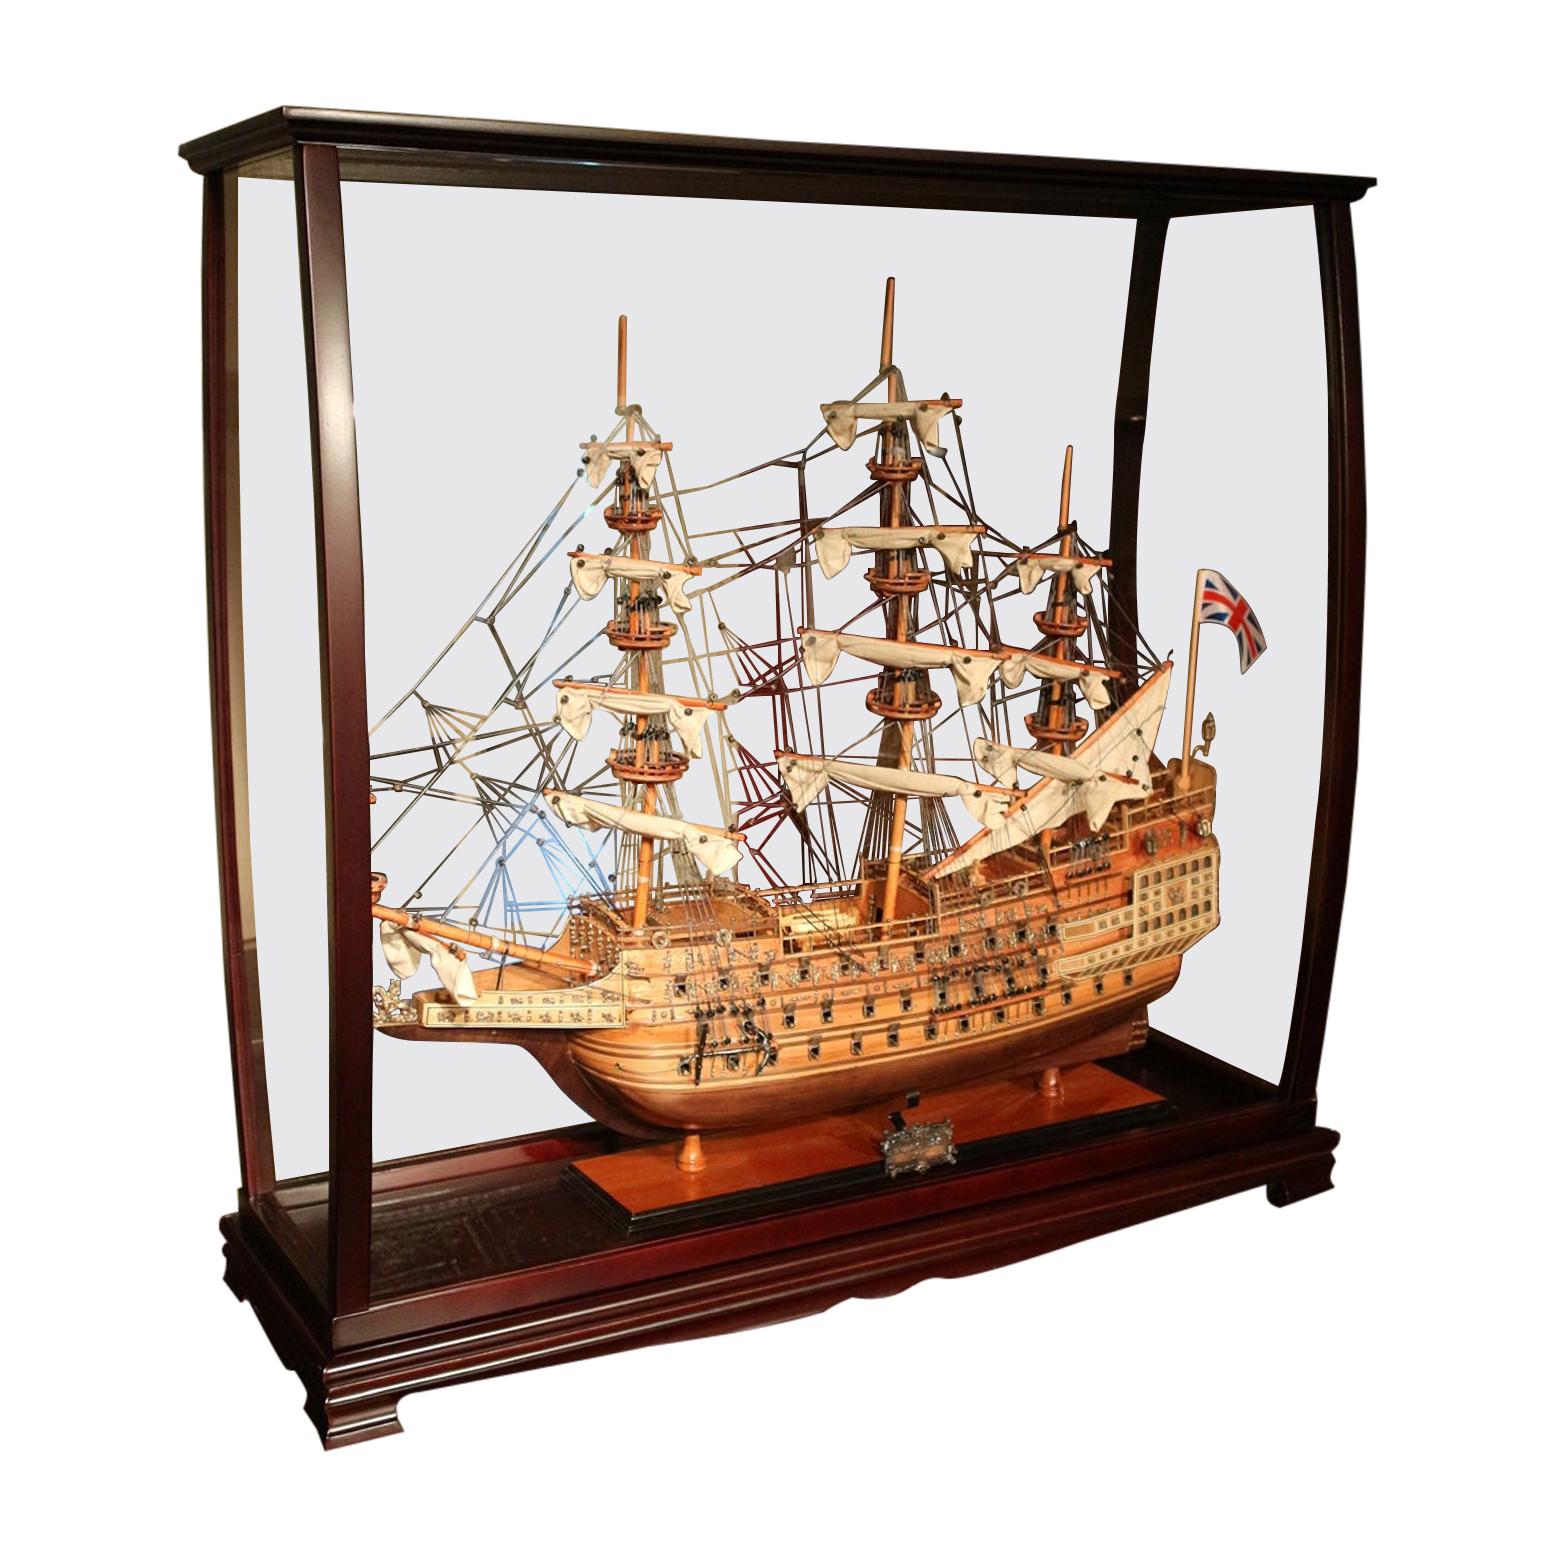 Museum-Quality, Fully Assembled Replica of H.M.S. Sovereign of the Seas